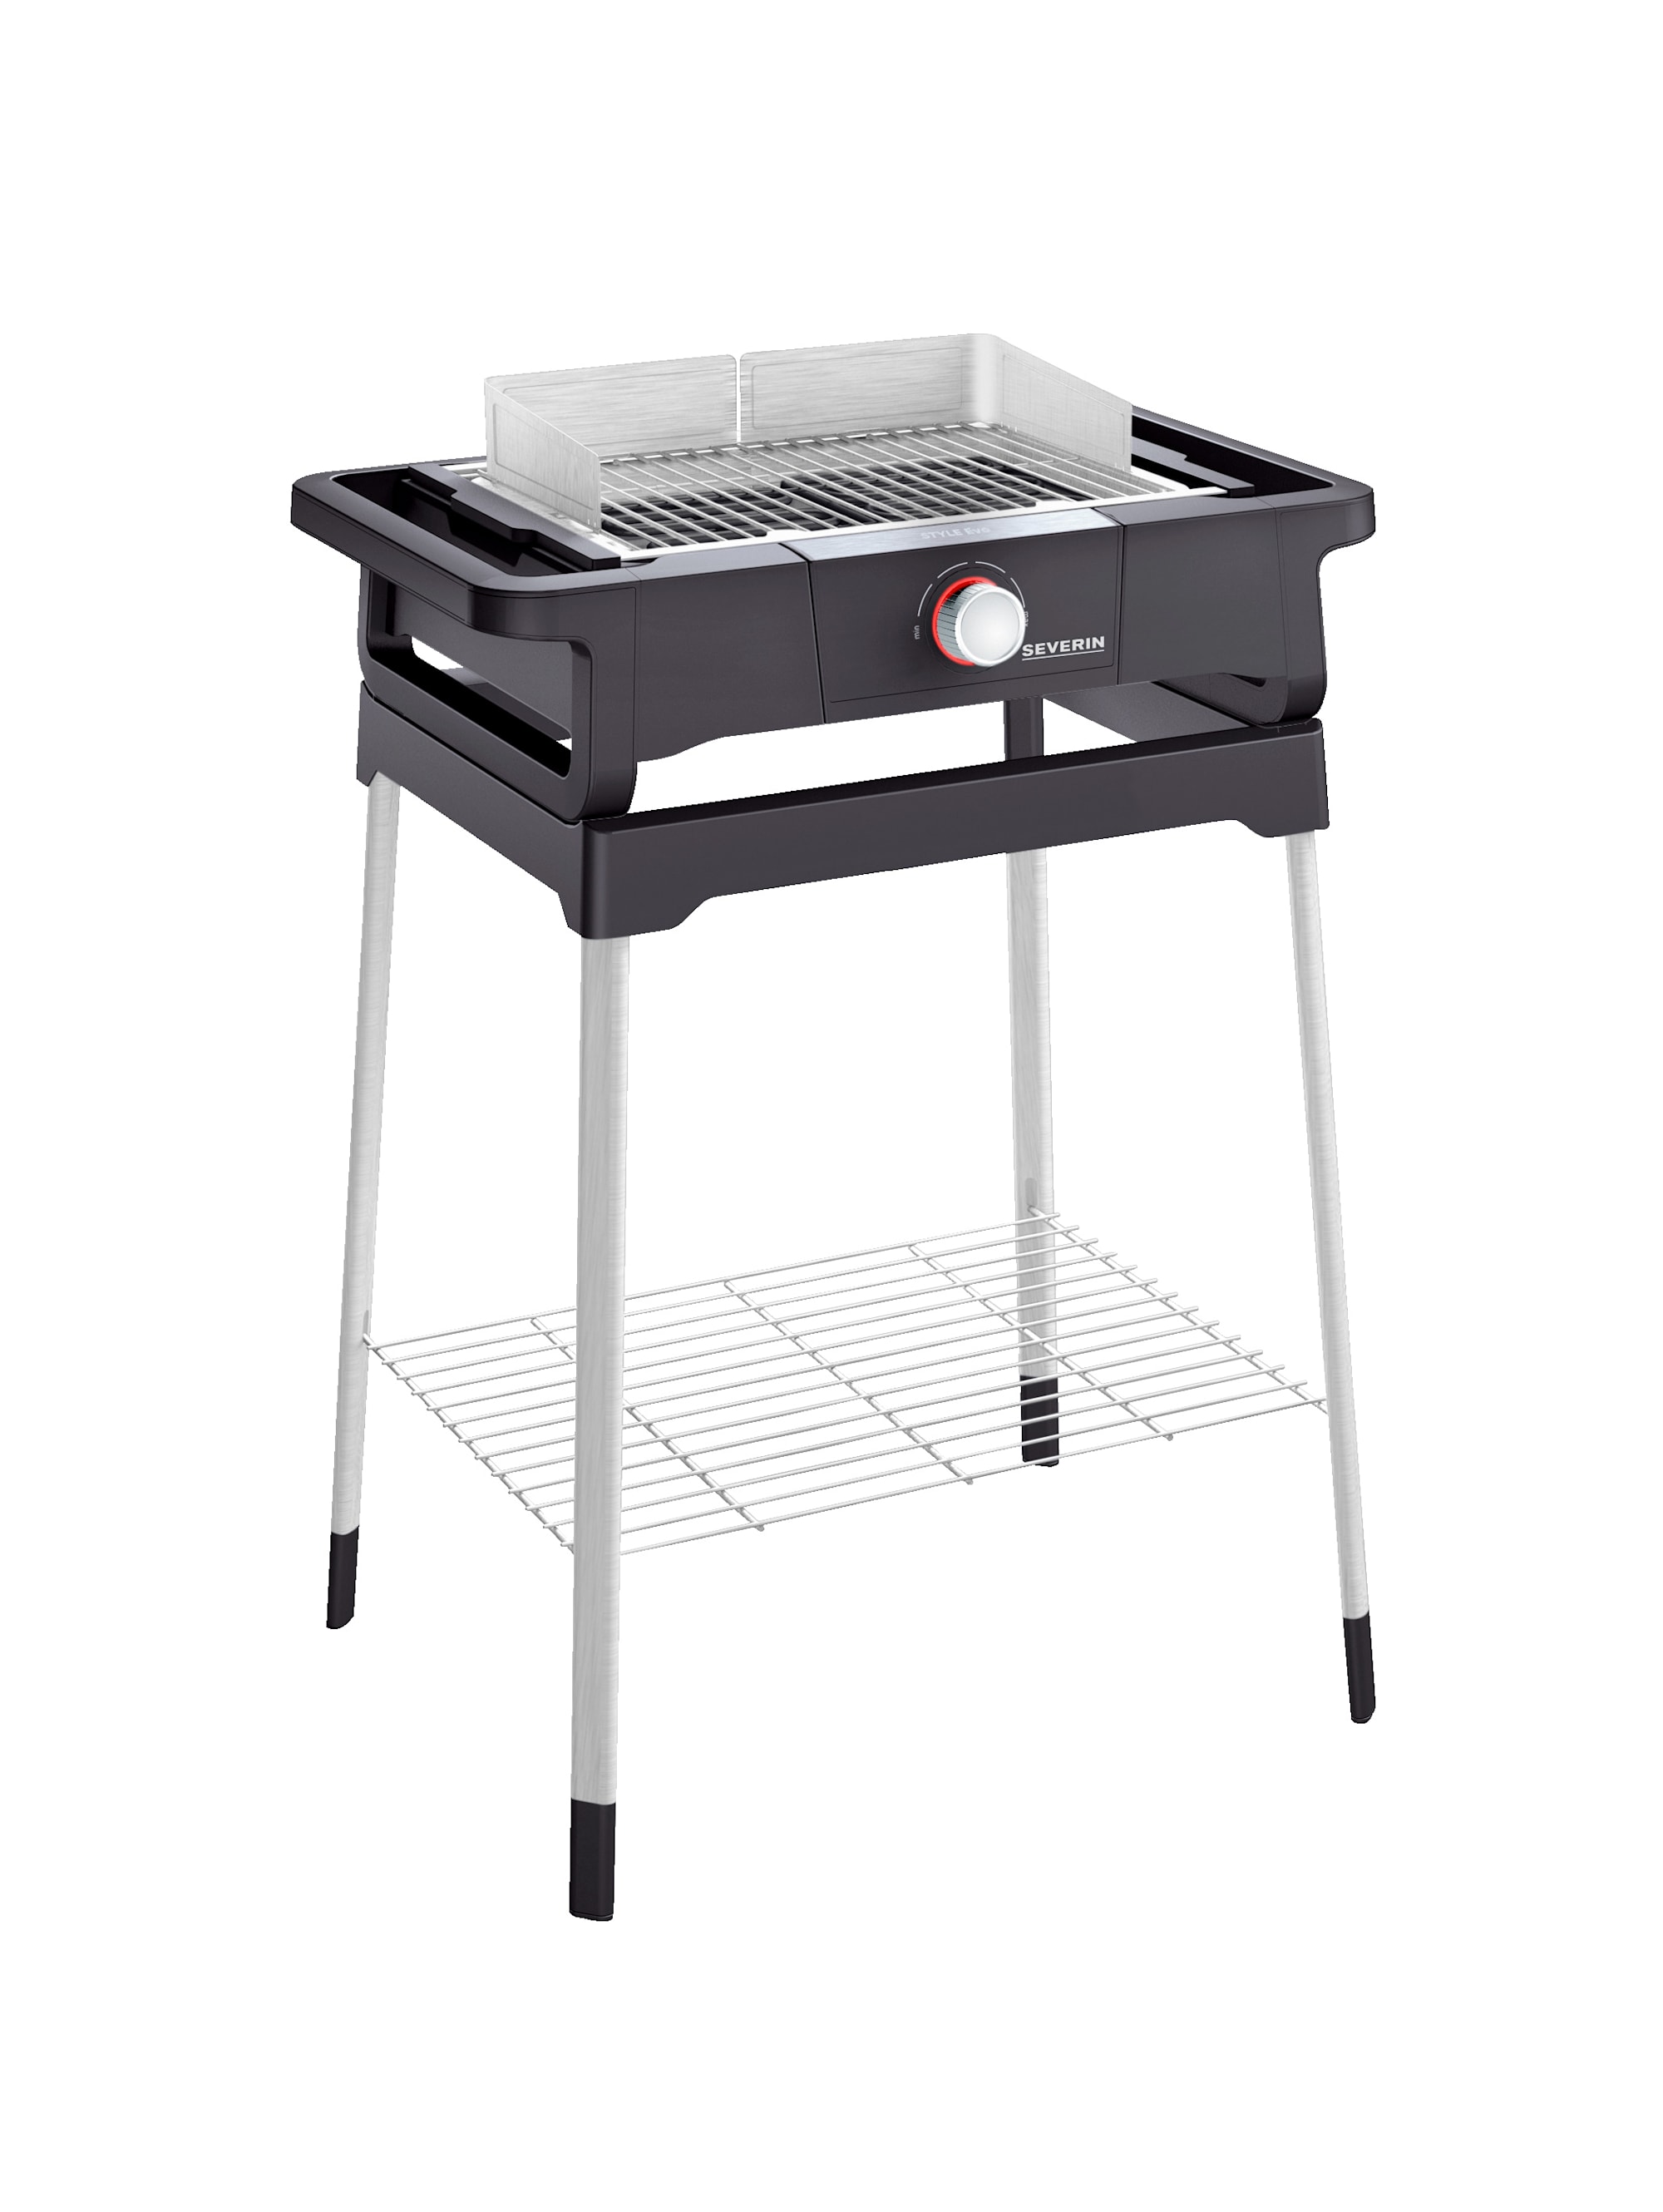 ca. SEVERIN EVO S Standgrill 8124 PG STYLE